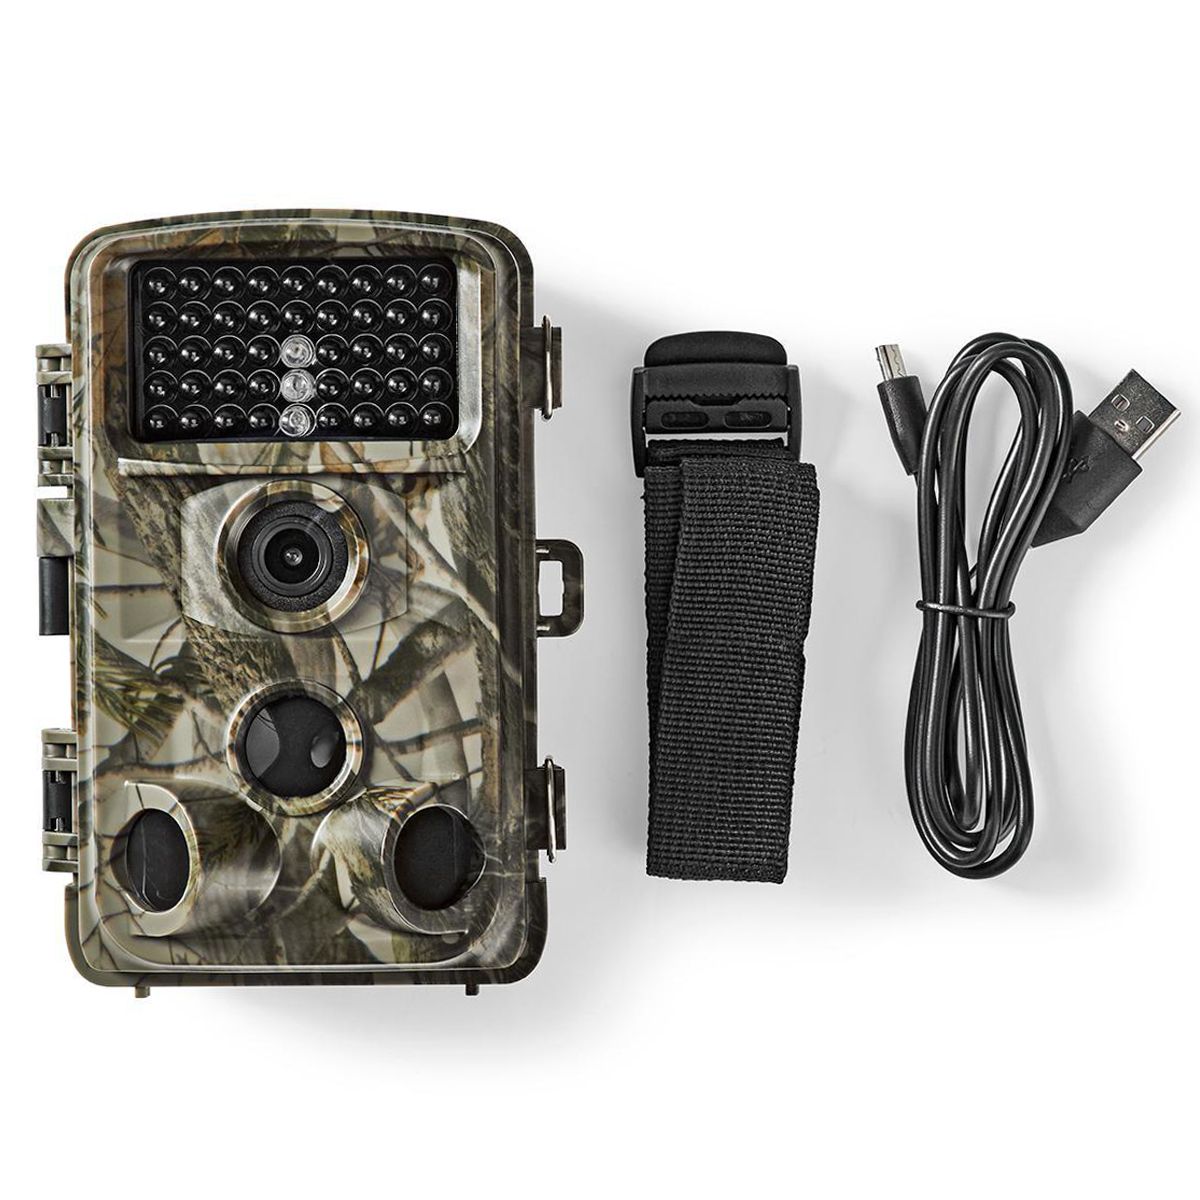 Nedis Camouflage Camera 1080p 30fps, 24MP camera with 2.4" screen, IR black without light, night vision, motion sensor camera, wildlife monitoring